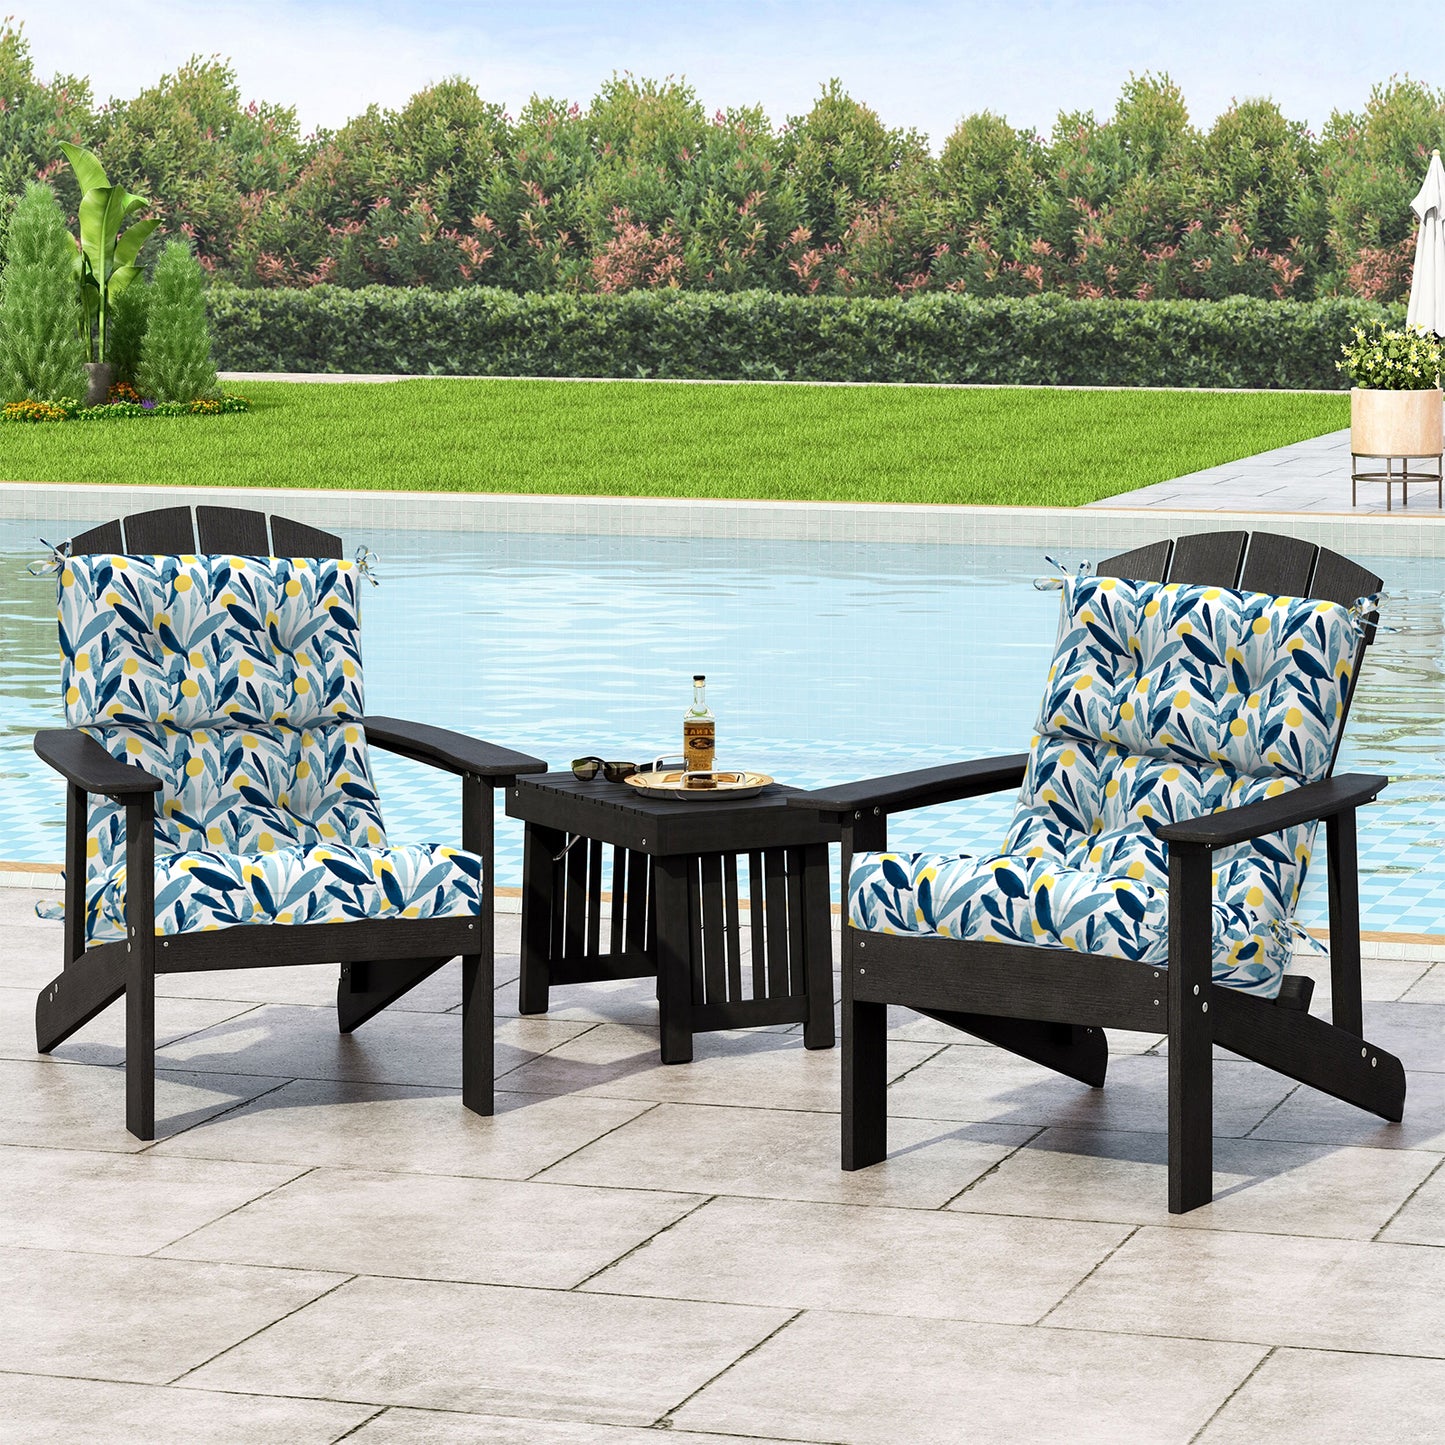 Melody Elephant Outdoor Tufted High Back Chair Cushions, Water Resistant Rocking Seat Chair Cushions 2 Pack, Adirondack Cushions for Patio Home Garden, 22" W x 20" D, Leaves Multi